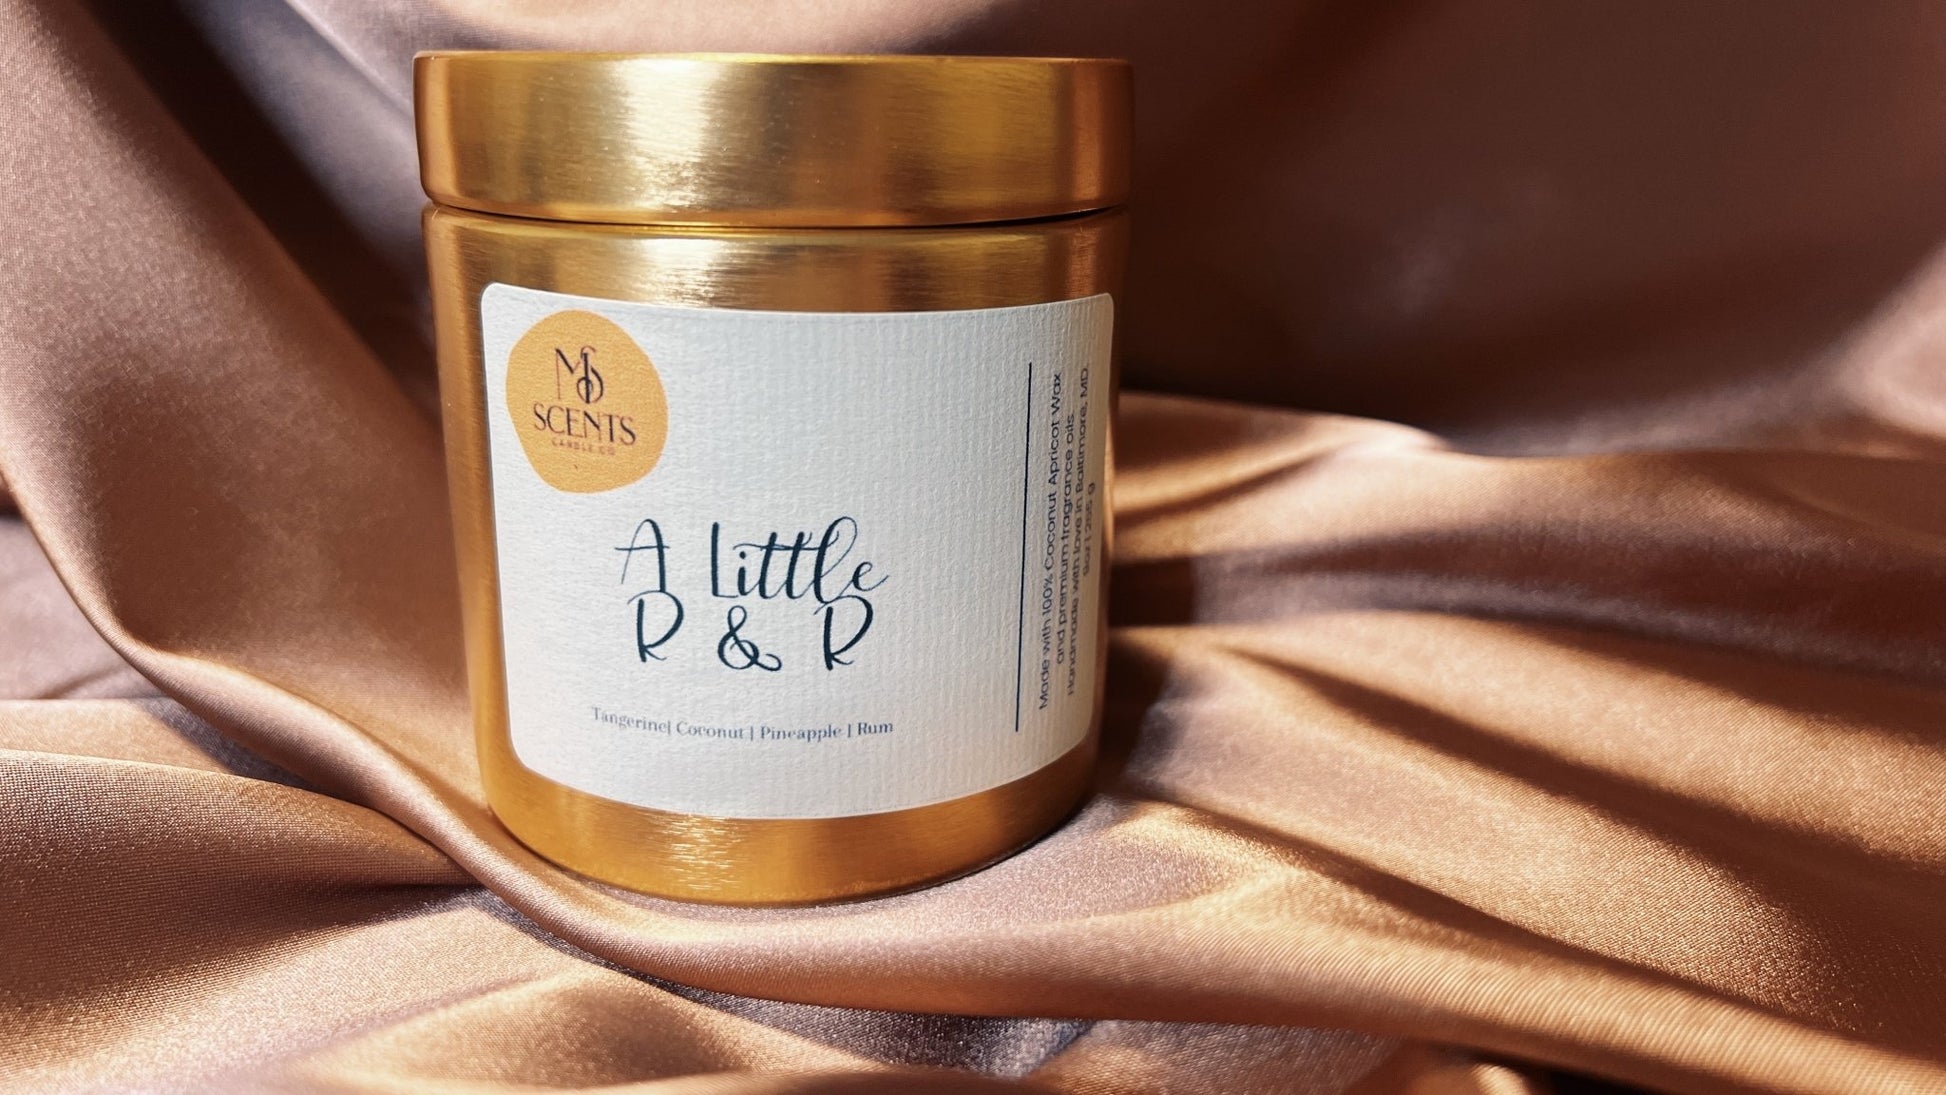 A Little R & R - MS Scents Candle Co.